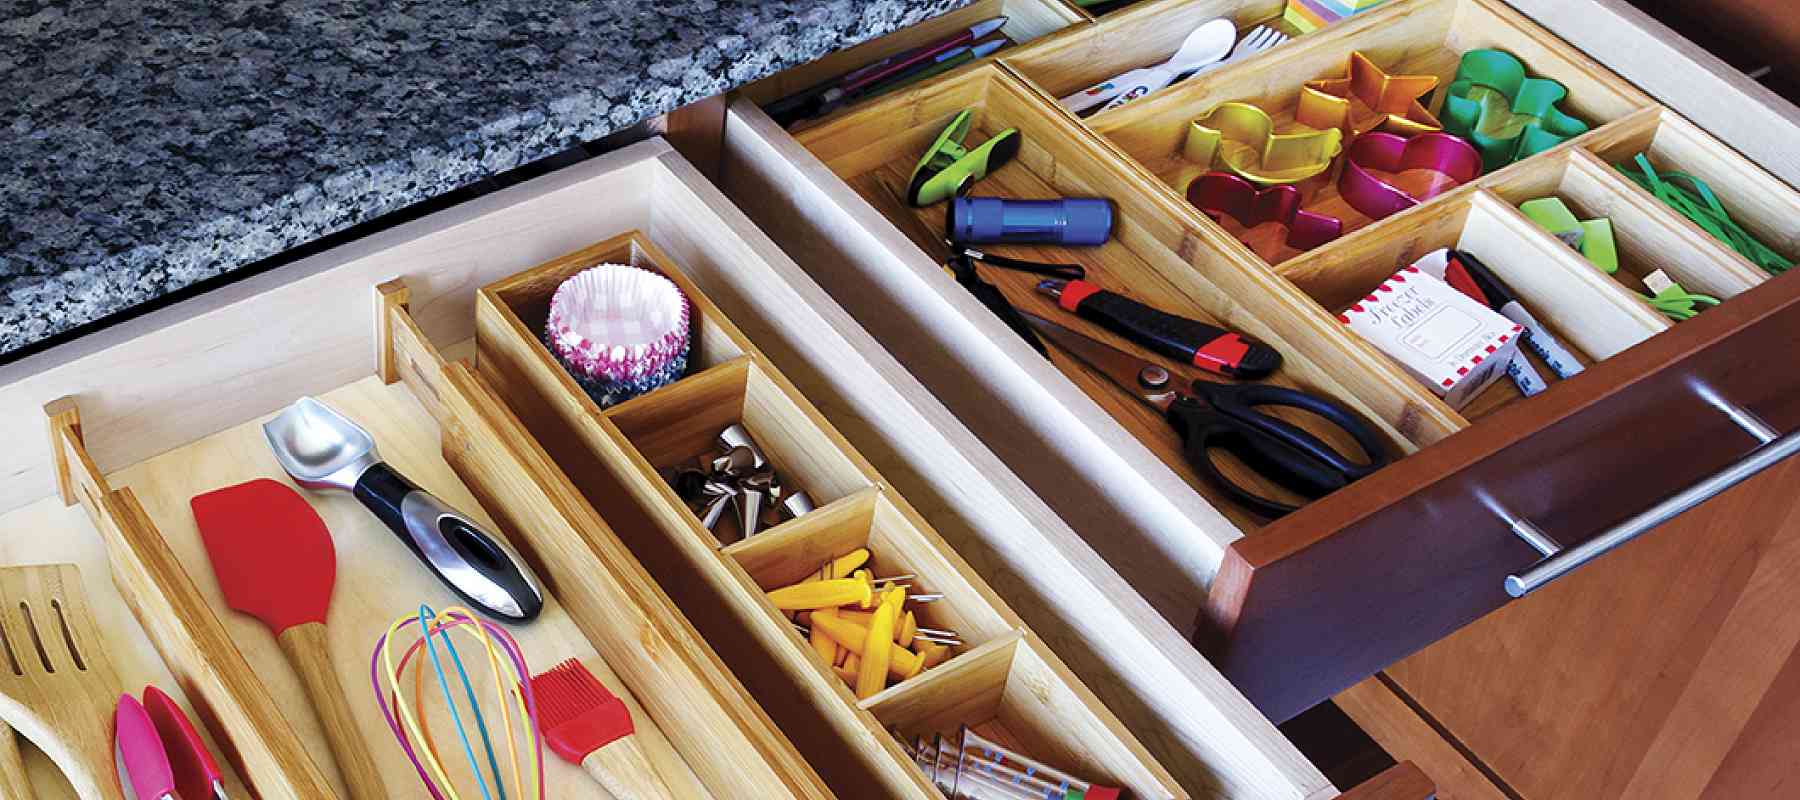 How to Improve Drawer Organization in Your Home